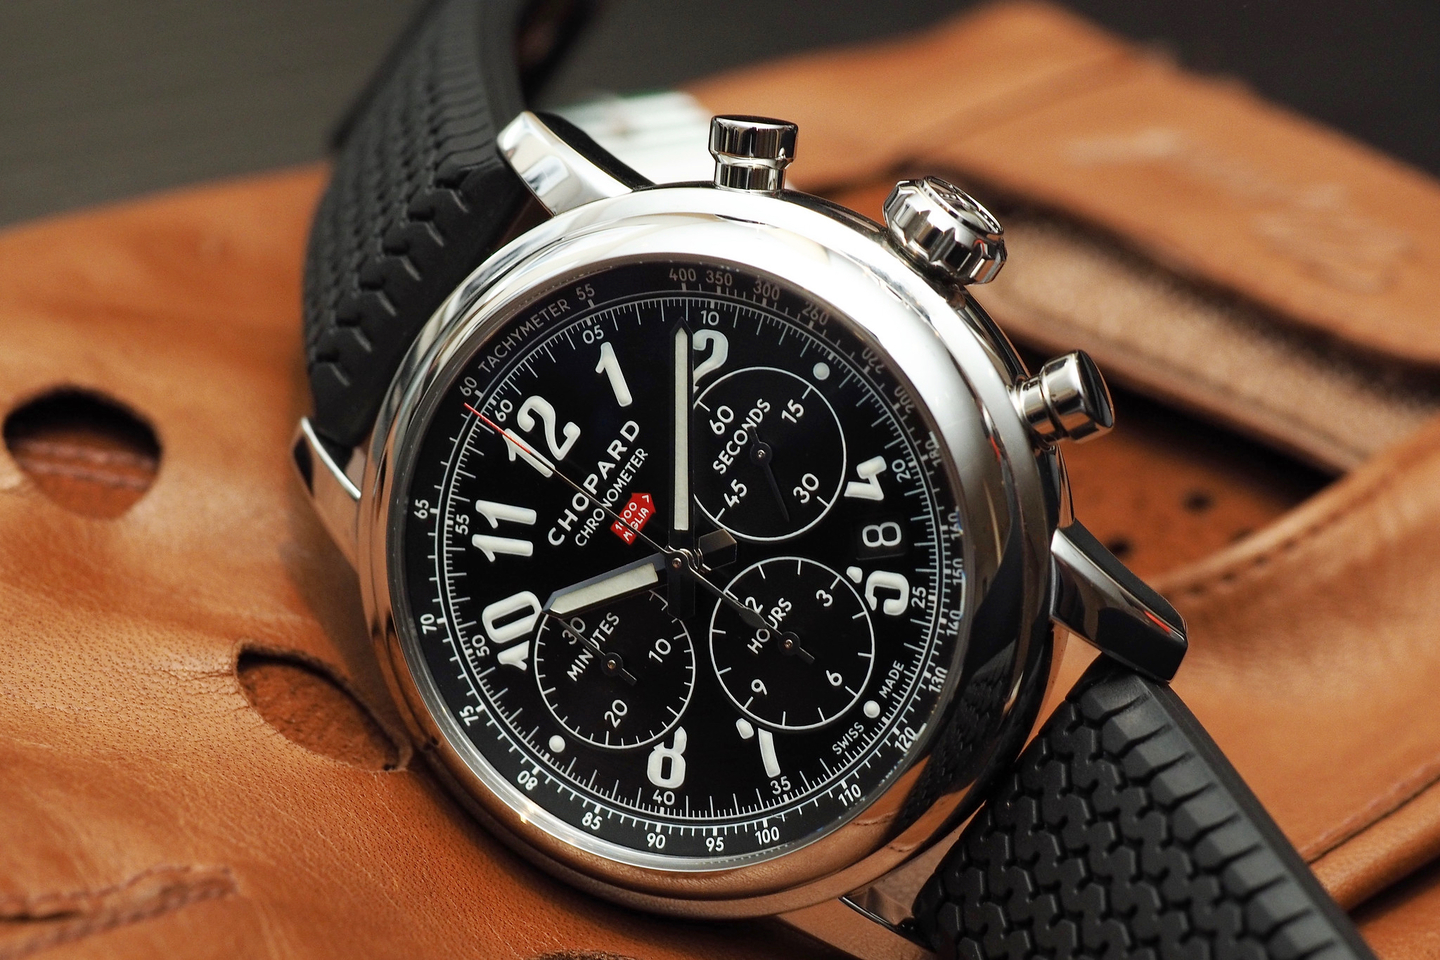 Mille Miglia Classic Chronograph Hands-On